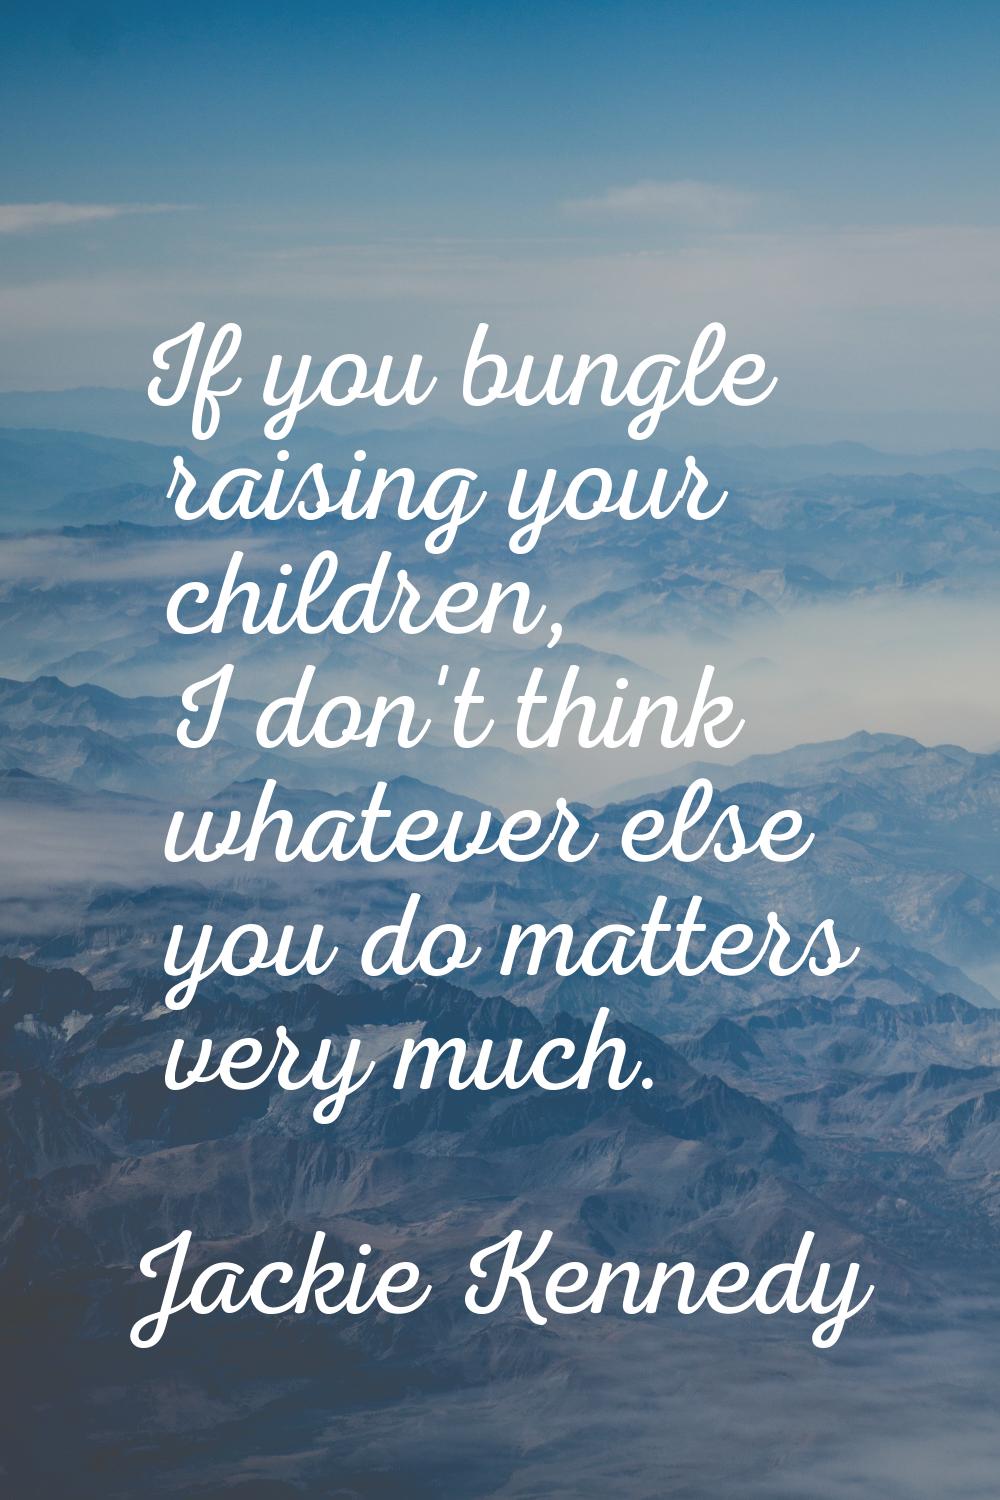 If you bungle raising your children, I don't think whatever else you do matters very much.